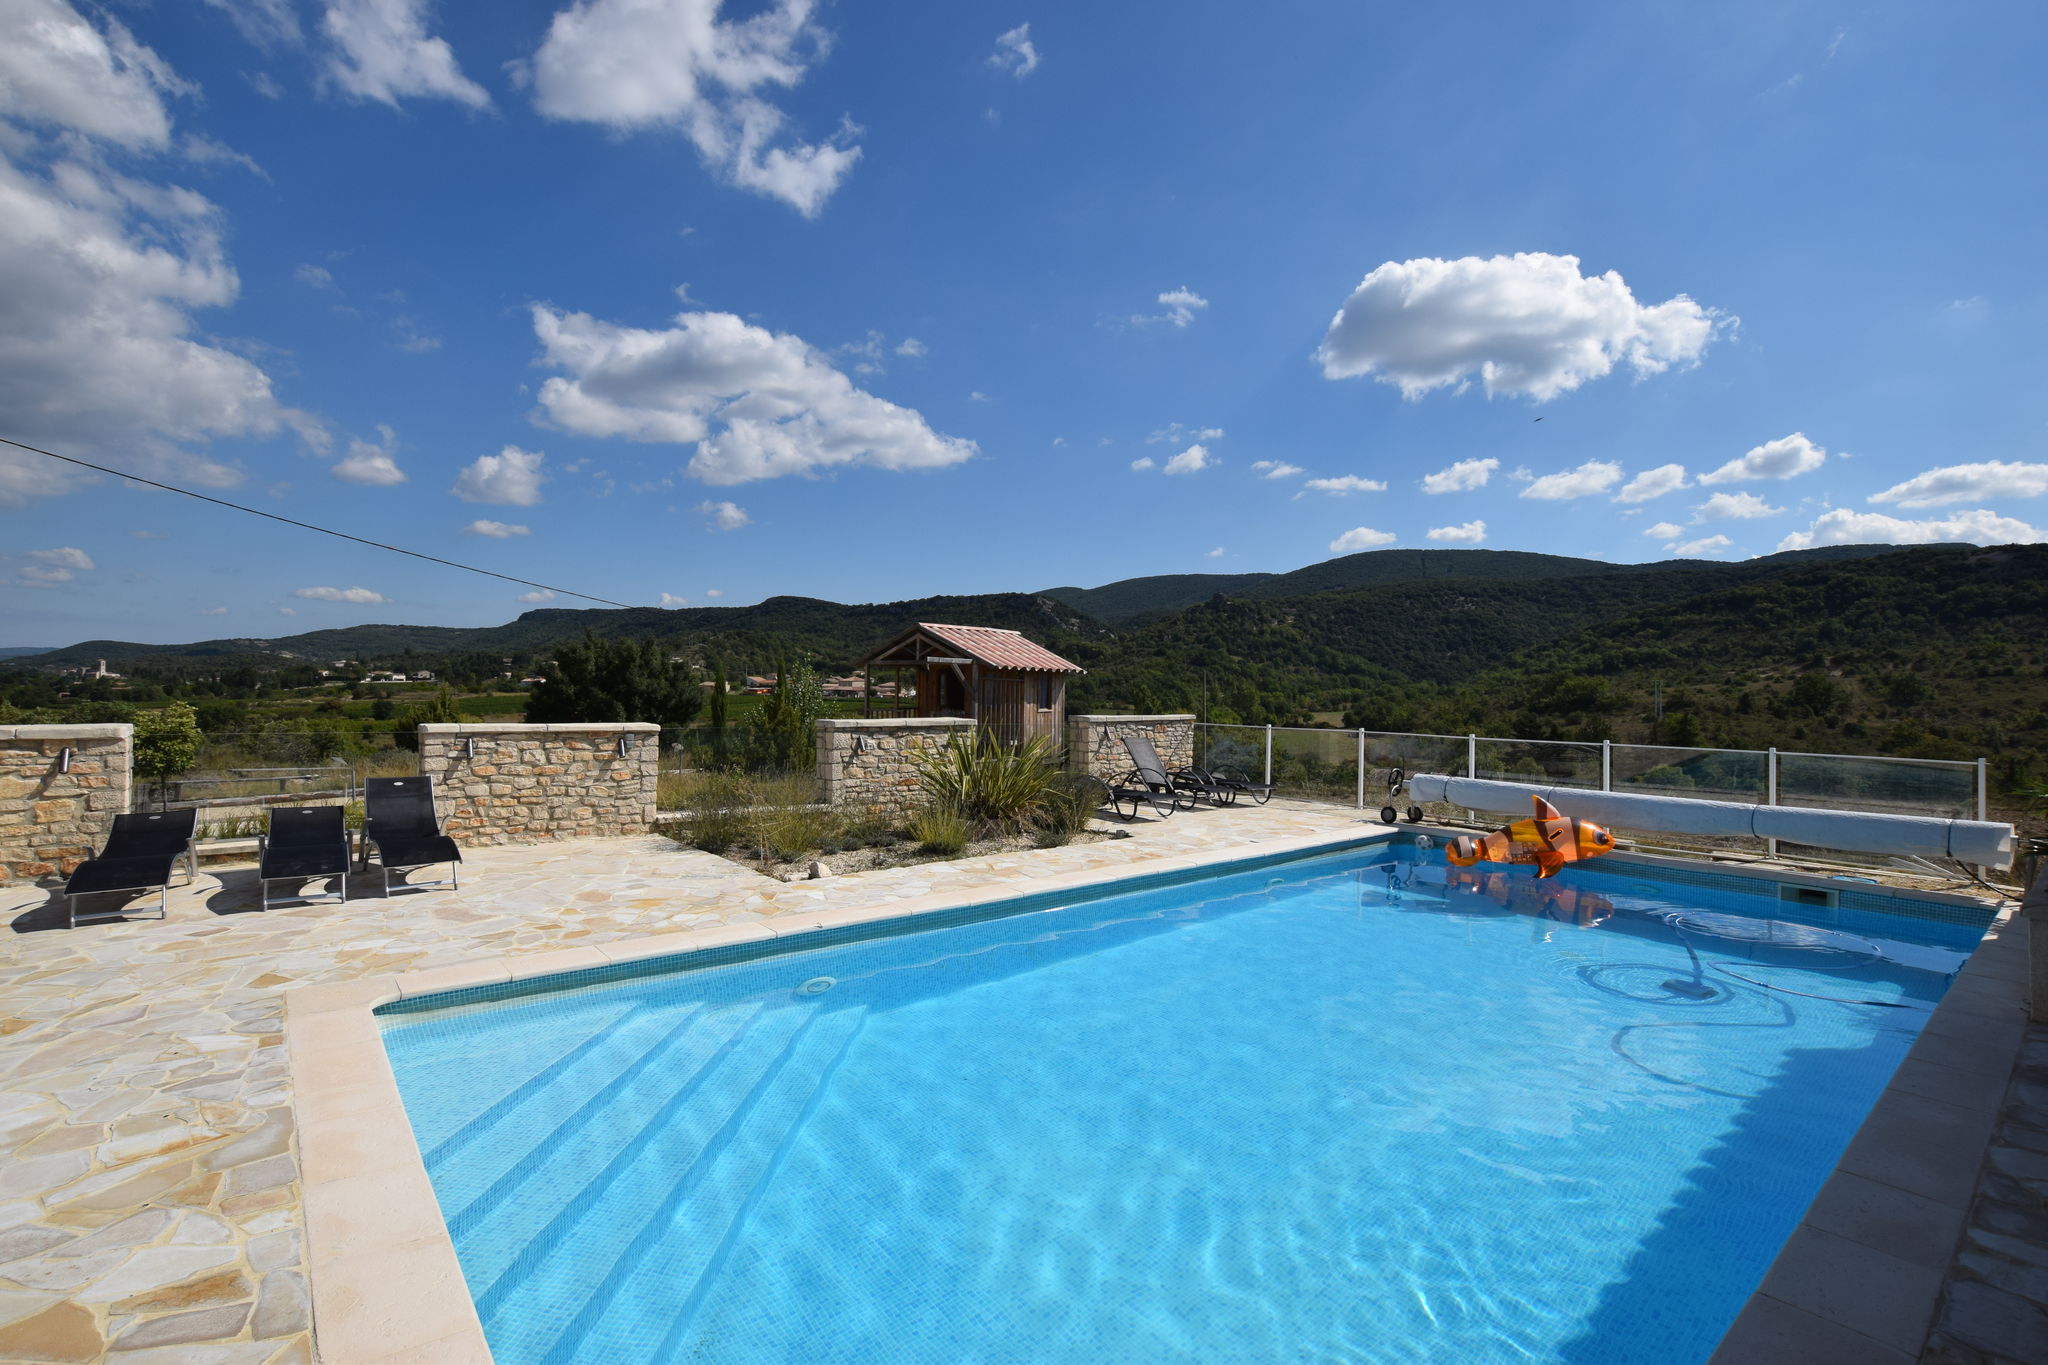 Countryside villa in Ardeche with gorgeous views